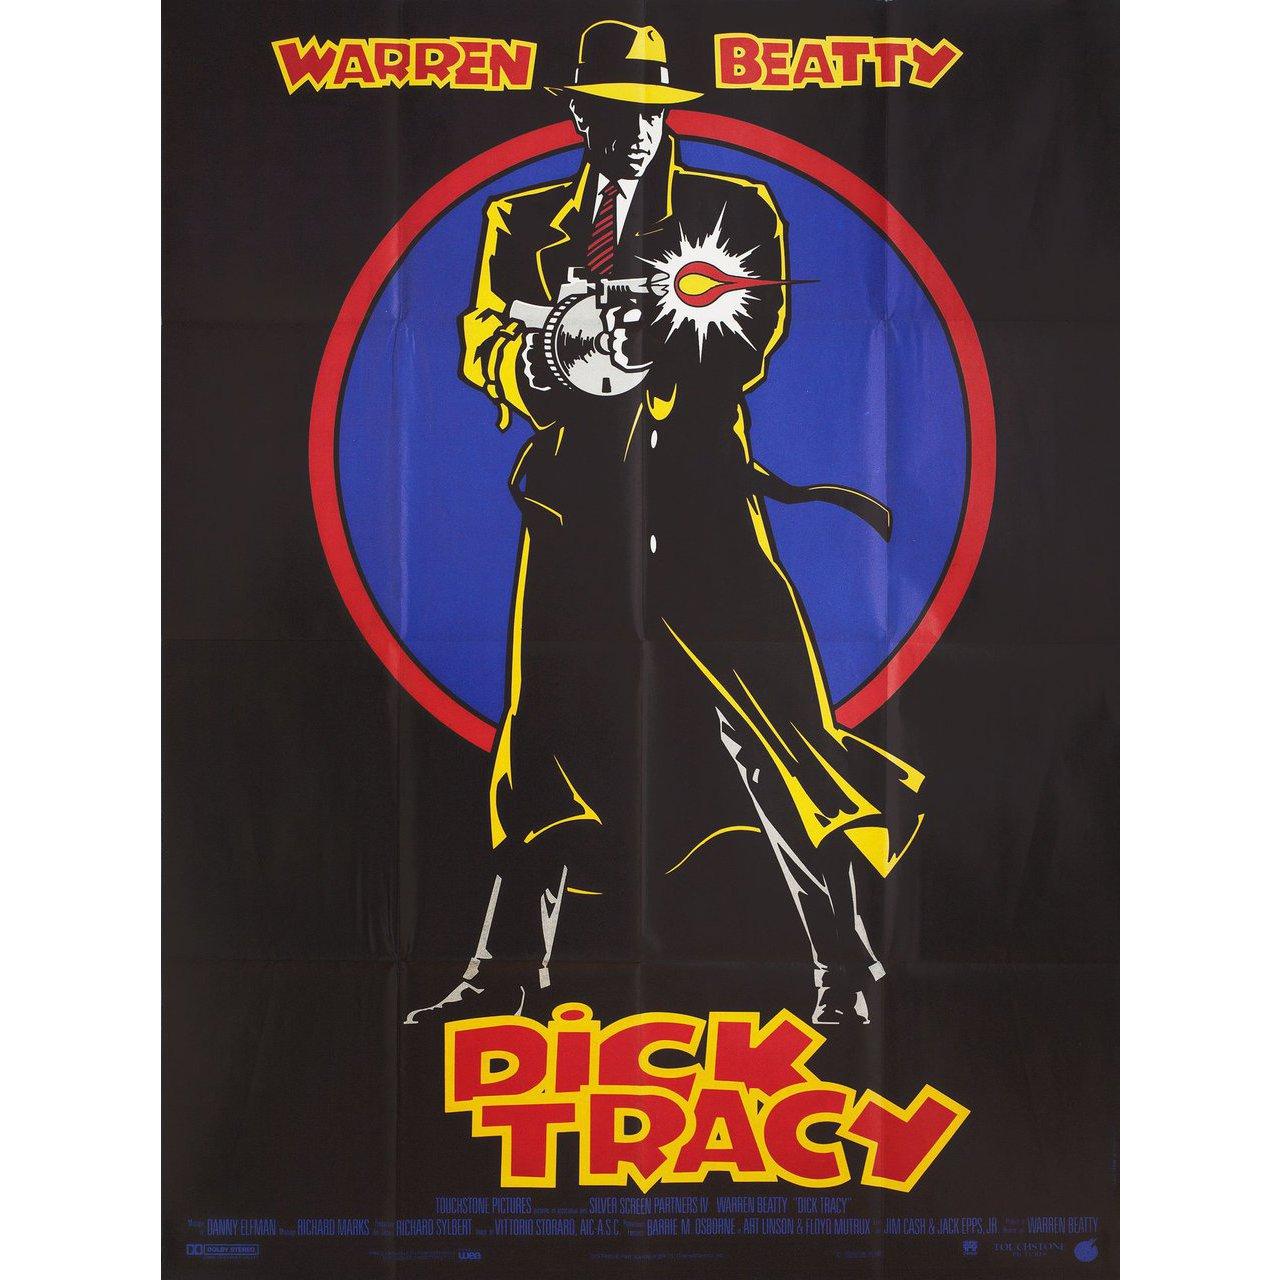 Original 1990 French grande poster for the film Dick Tracy directed by Warren Beatty with Warren Beatty / Charlie Korsmo / Michael Donovan O'Donnell / Jim Wilkey. Very Good-Fine condition, folded. Many original posters were issued folded or were